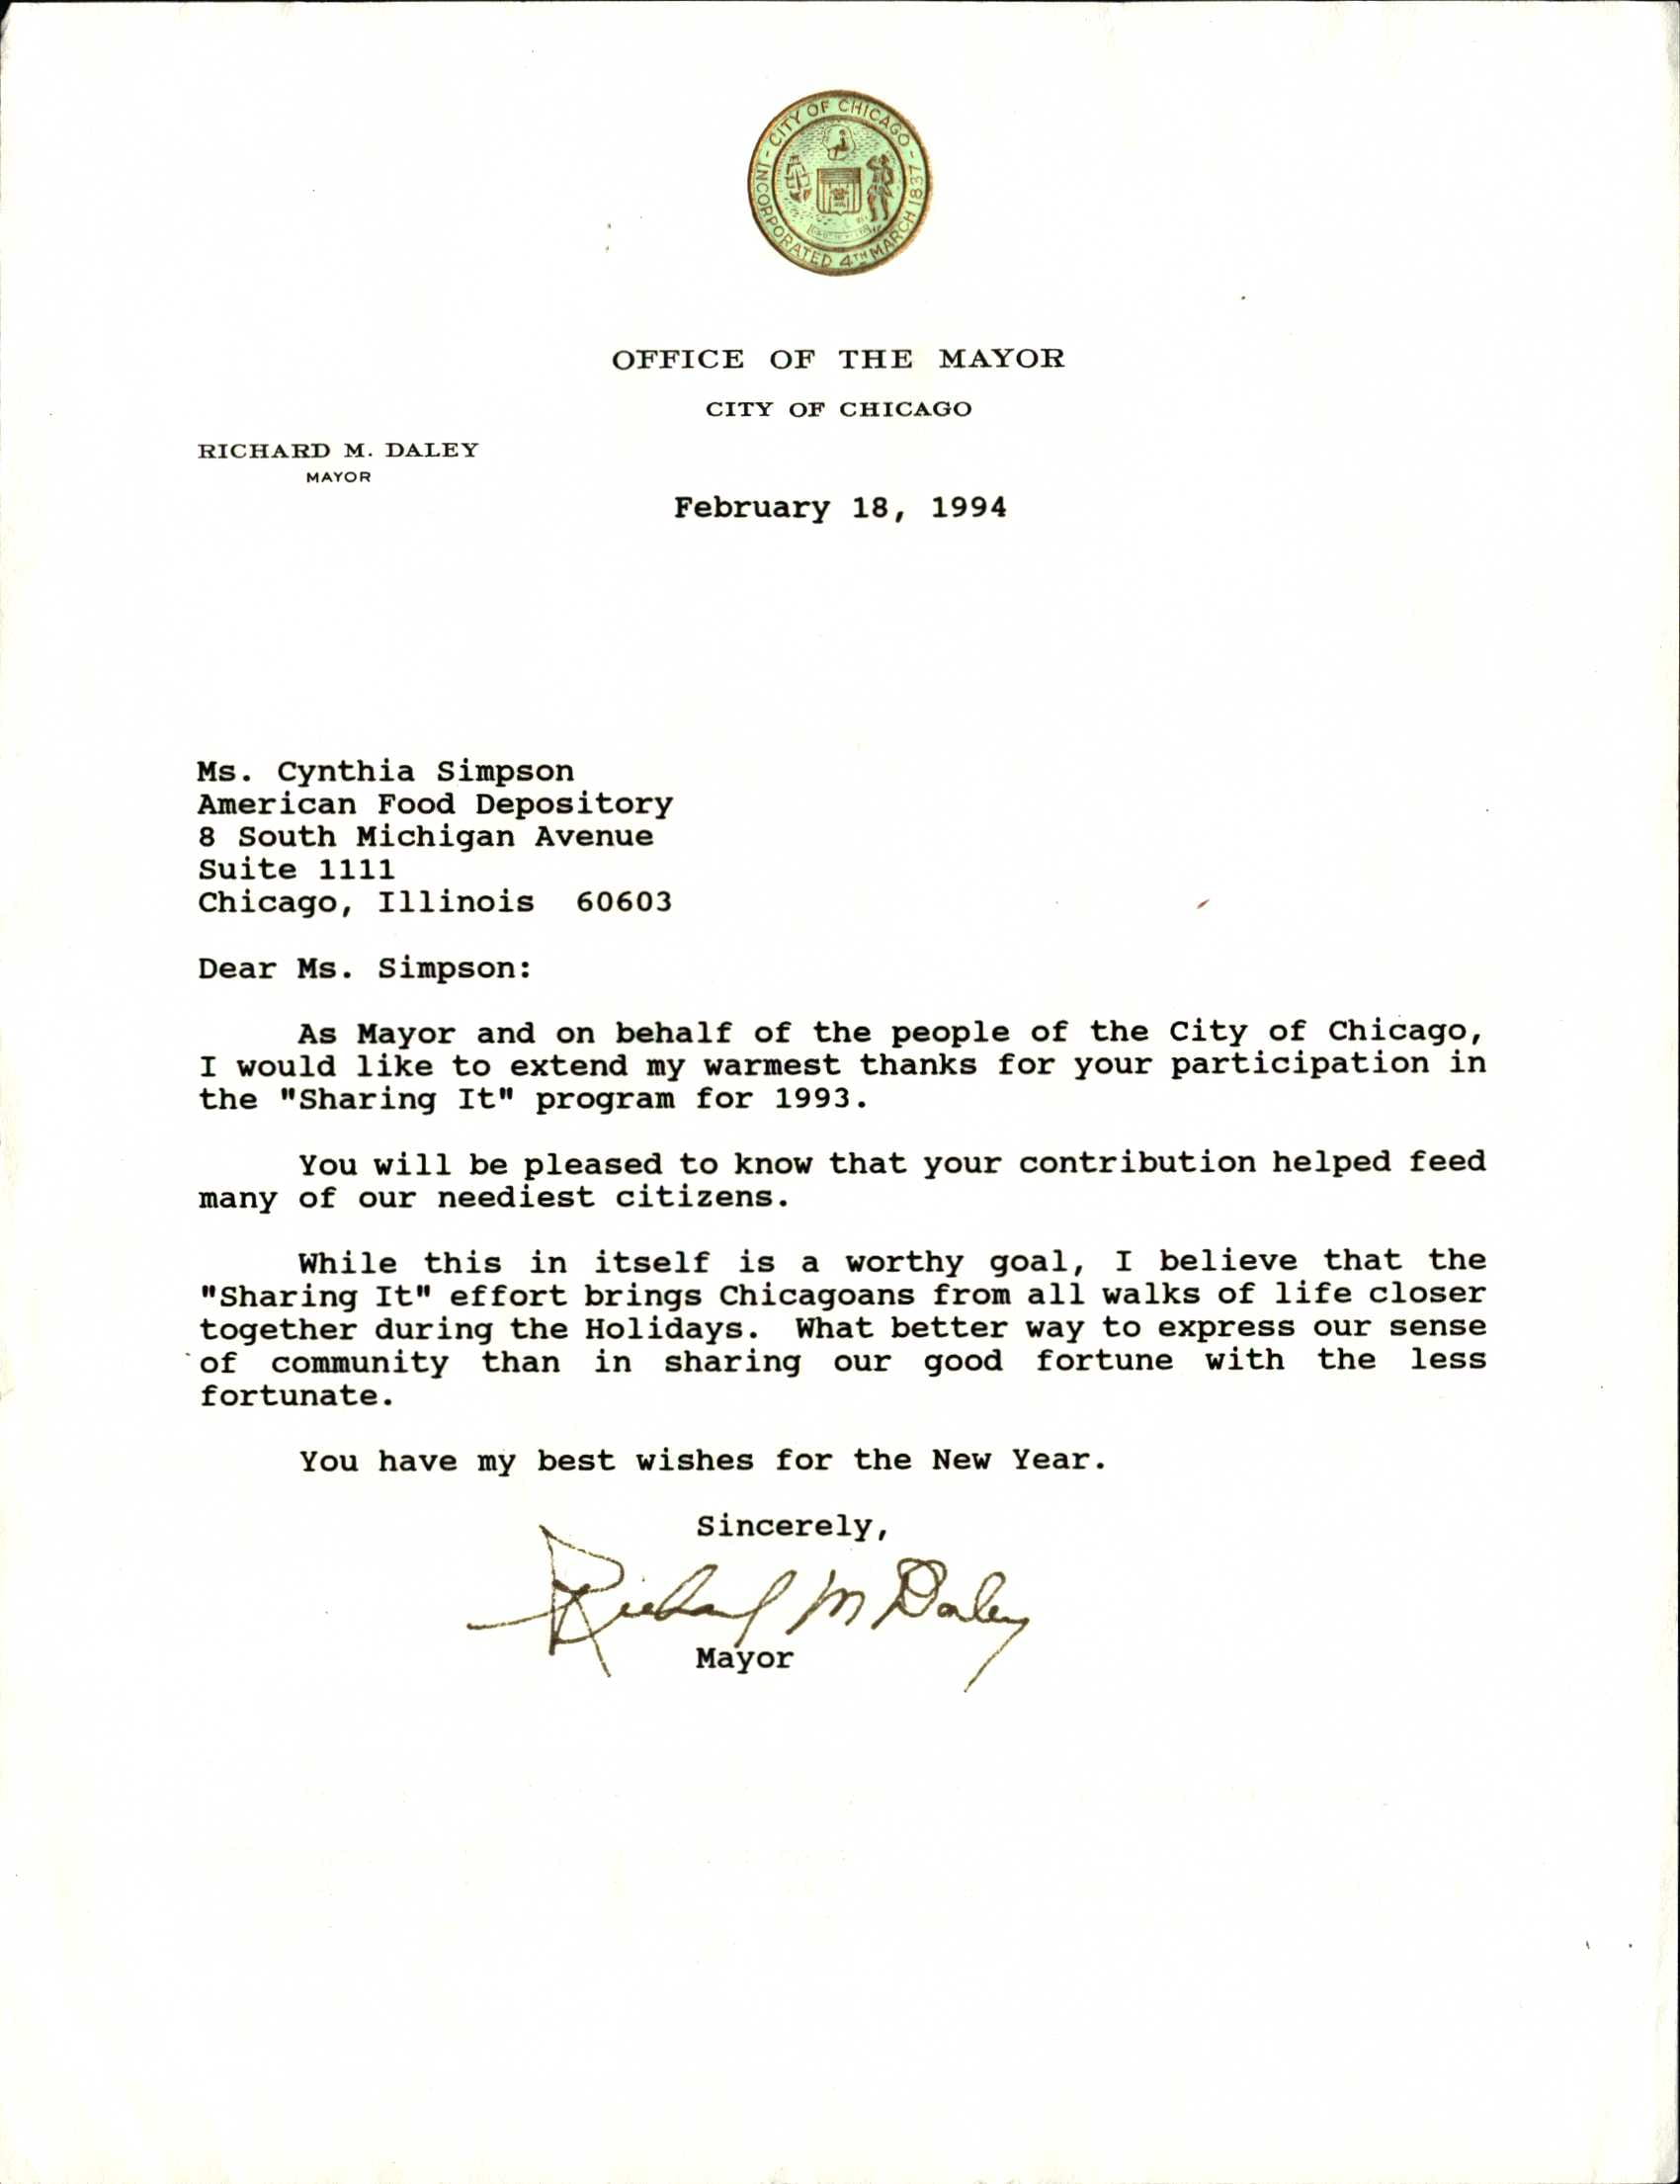 Letter of commendation from The Mayor of Chicago